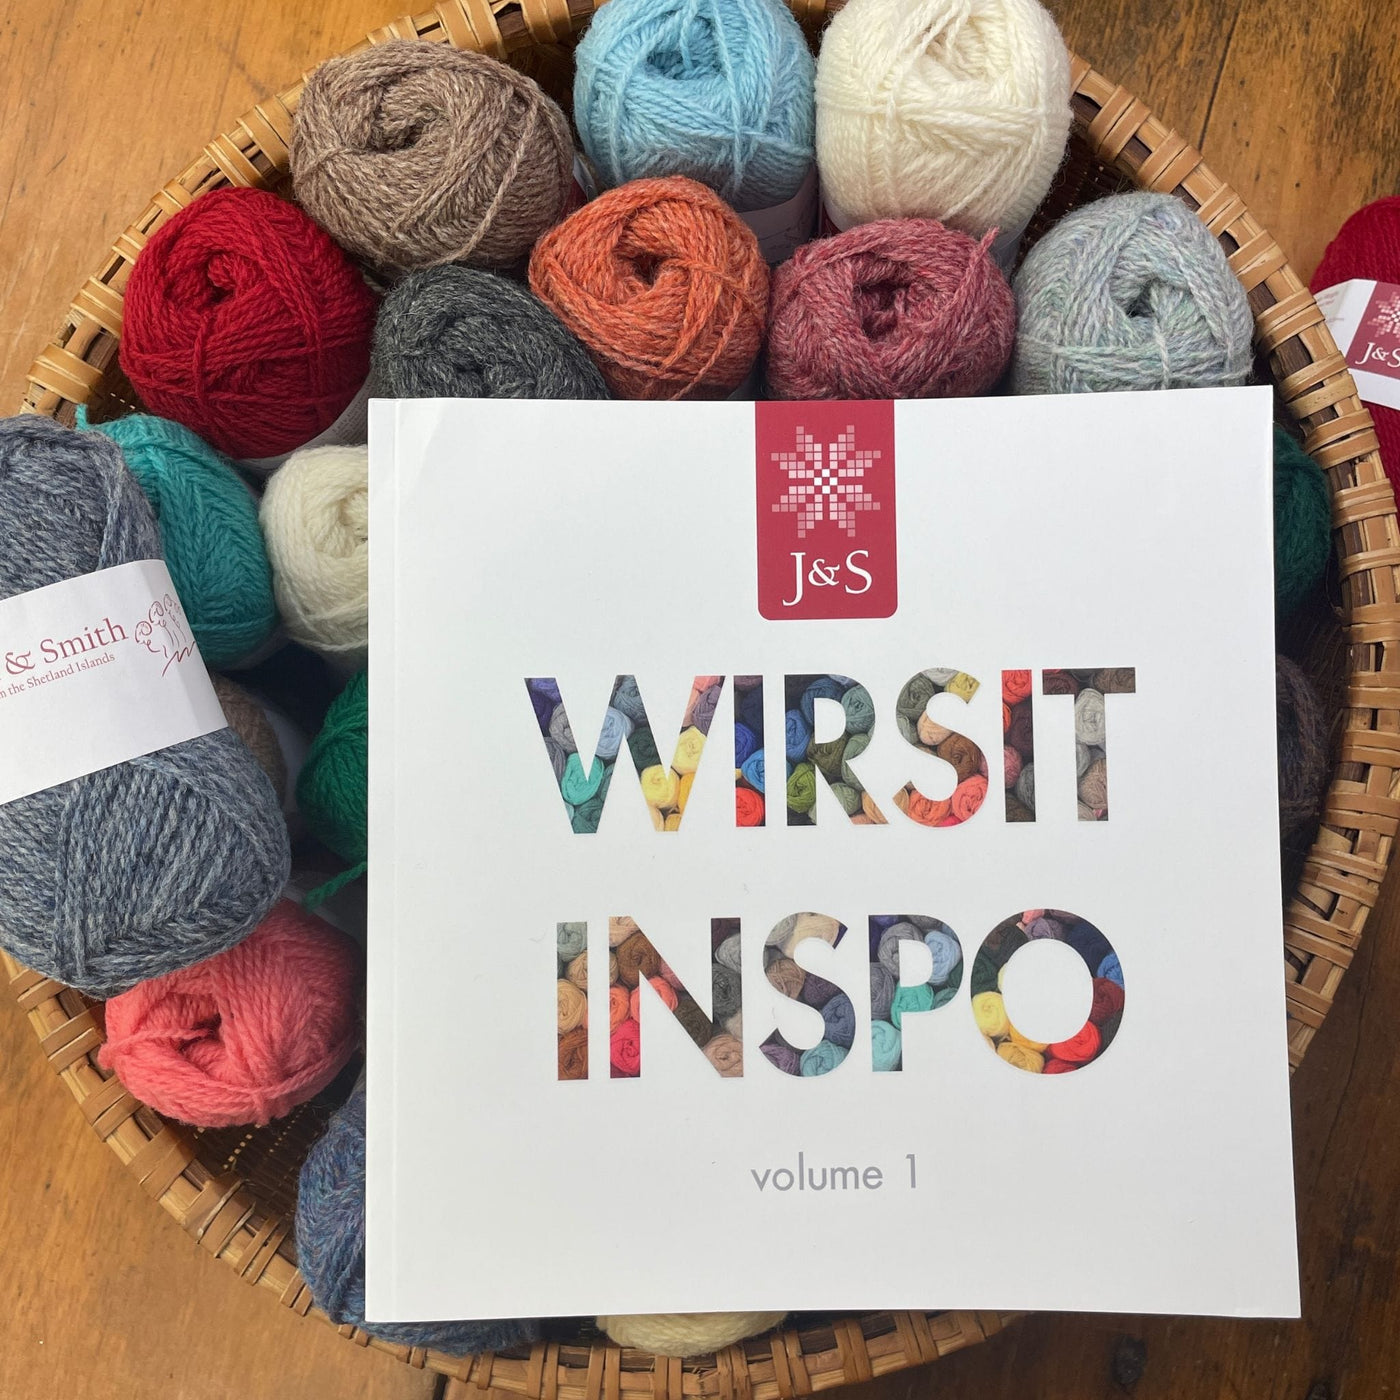 Wirsit Inspo Volume 1 from Jamieson & Smith. Cover of book is shown on top of a basket of Jamieson & Smith 2ply Jumper Weight yarn. 